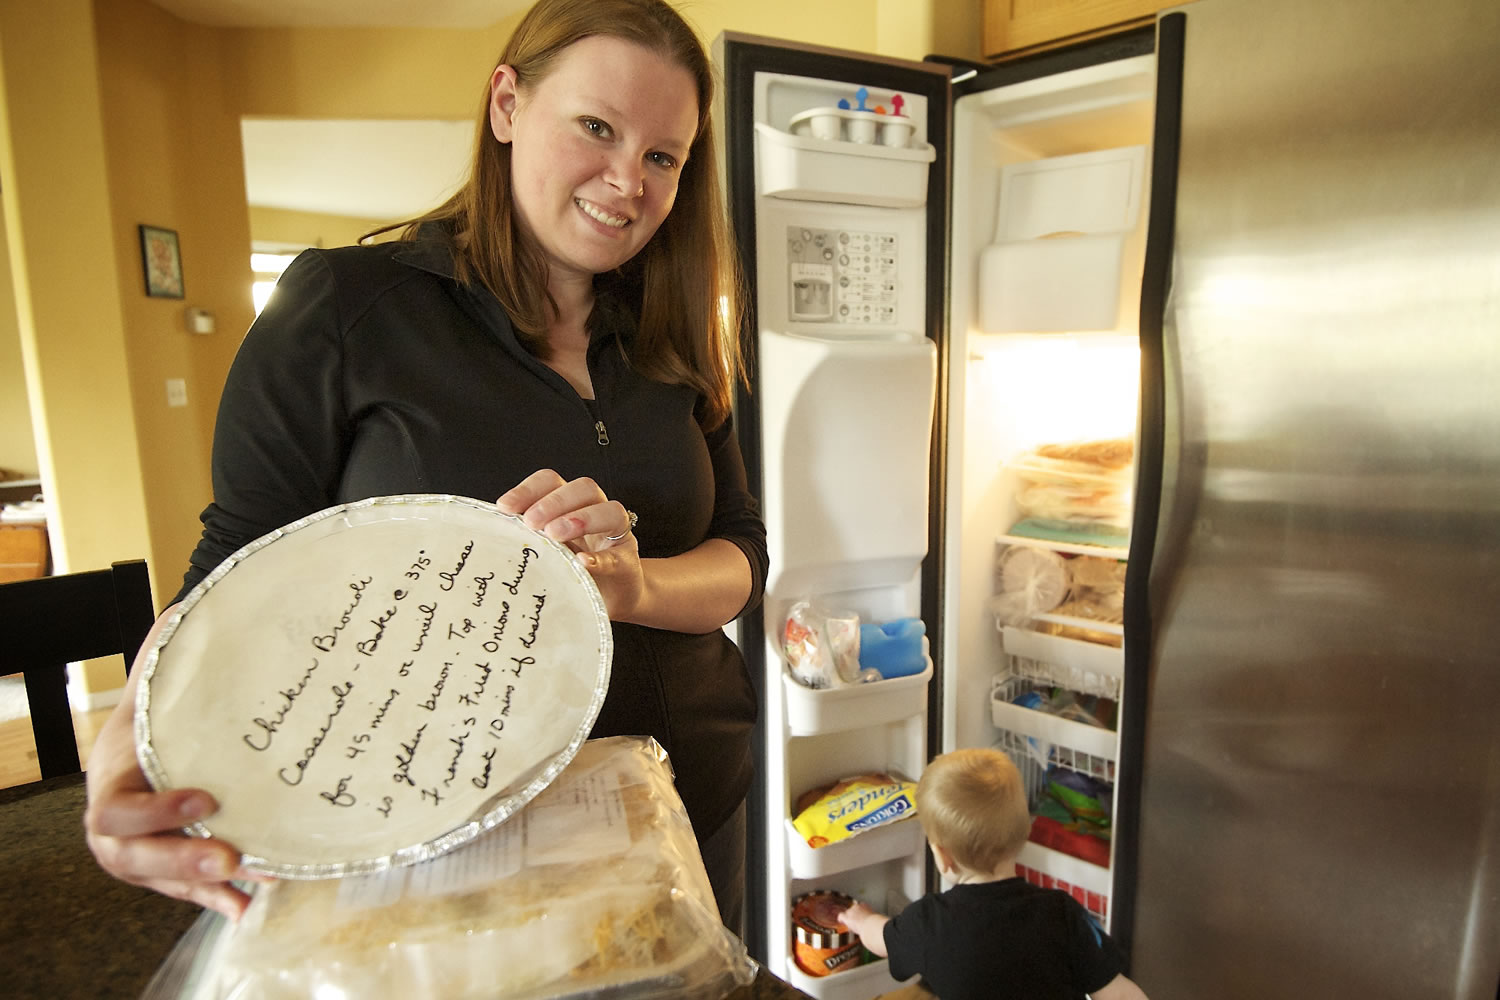 Julia Schetky shows off some of the meals she received at a moms group food swap last month, while her son, Ethan, checks out the other food in the freezer at the family home in Salmon Creek.